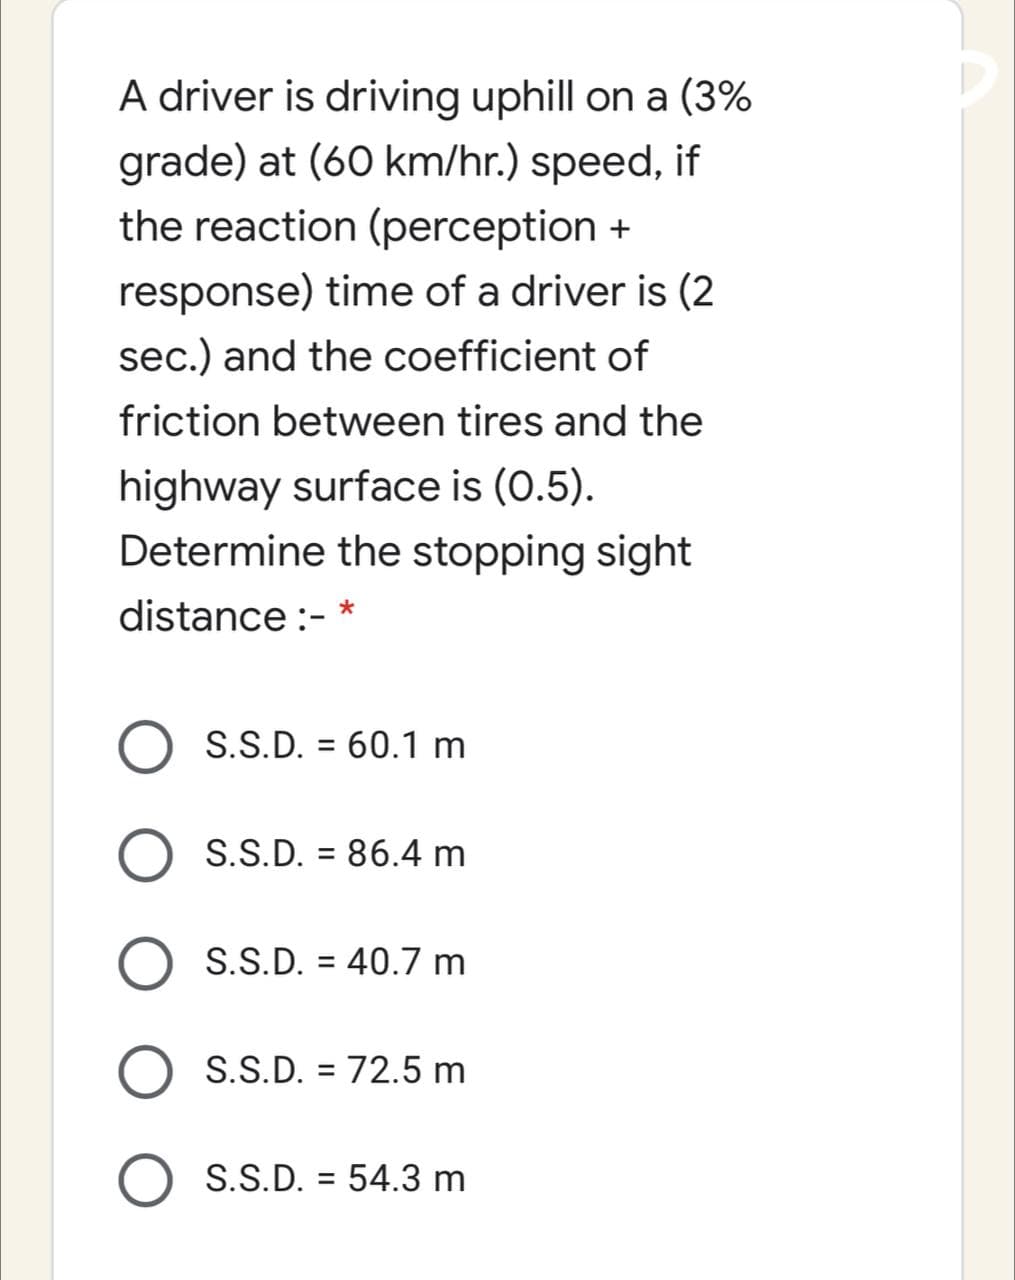 A driver is driving uphill on a (3%
grade) at (60 km/hr.) speed, if
the reaction (perception +
response) time of a driver is (2
sec.) and the coefficient of
friction between tires and the
highway surface is (0.5).
Determine the stopping sight
distance :-
S.S.D. = 60.1 m
%3D
O S.S.D. = 86.4 m
%3D
O S.S.D. = 40.7 m
%3D
S.S.D. = 72.5 m
%3D
O S.S.D. = 54.3 m
